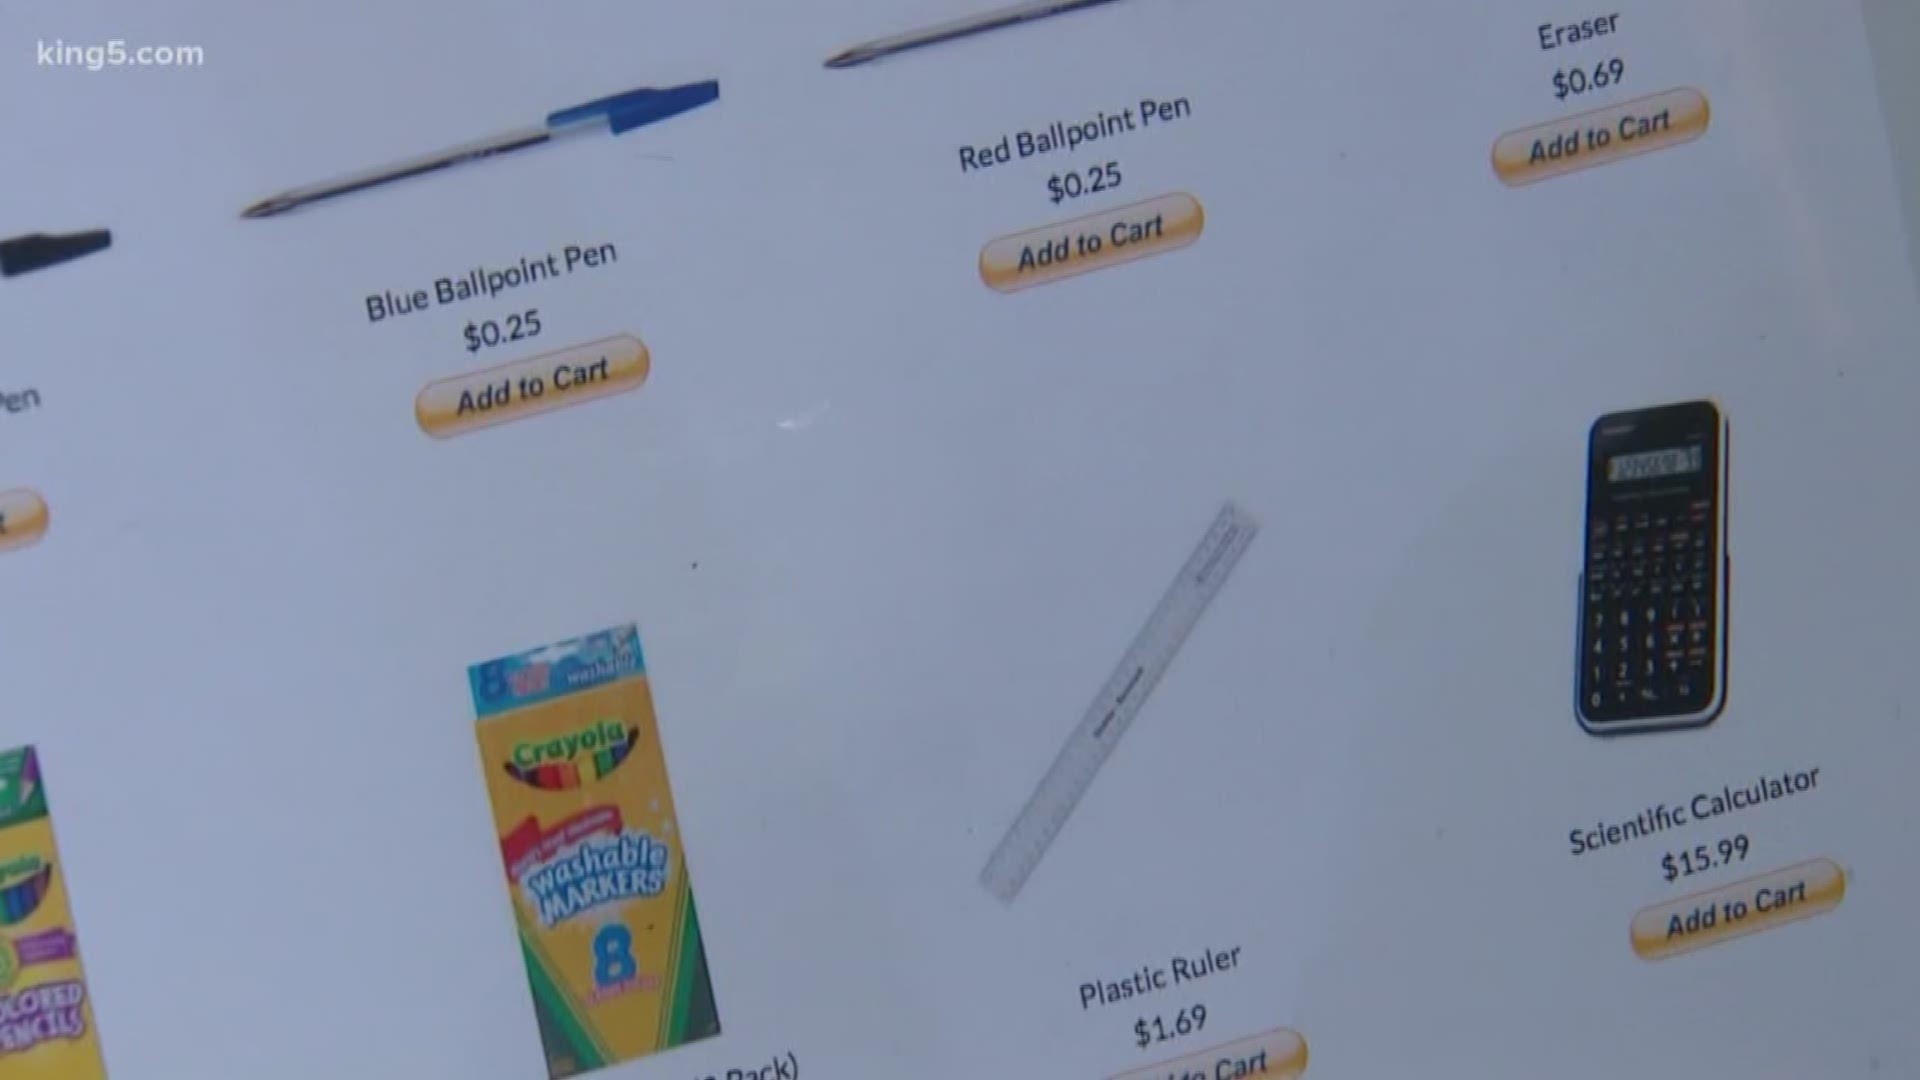 Washington state Attorney General Bob Ferguson has announced Amazon will remove toxic school supplies from its website. A state investigation found dozens of school supplies, marketed to young children, that had high levels of toxic metals.